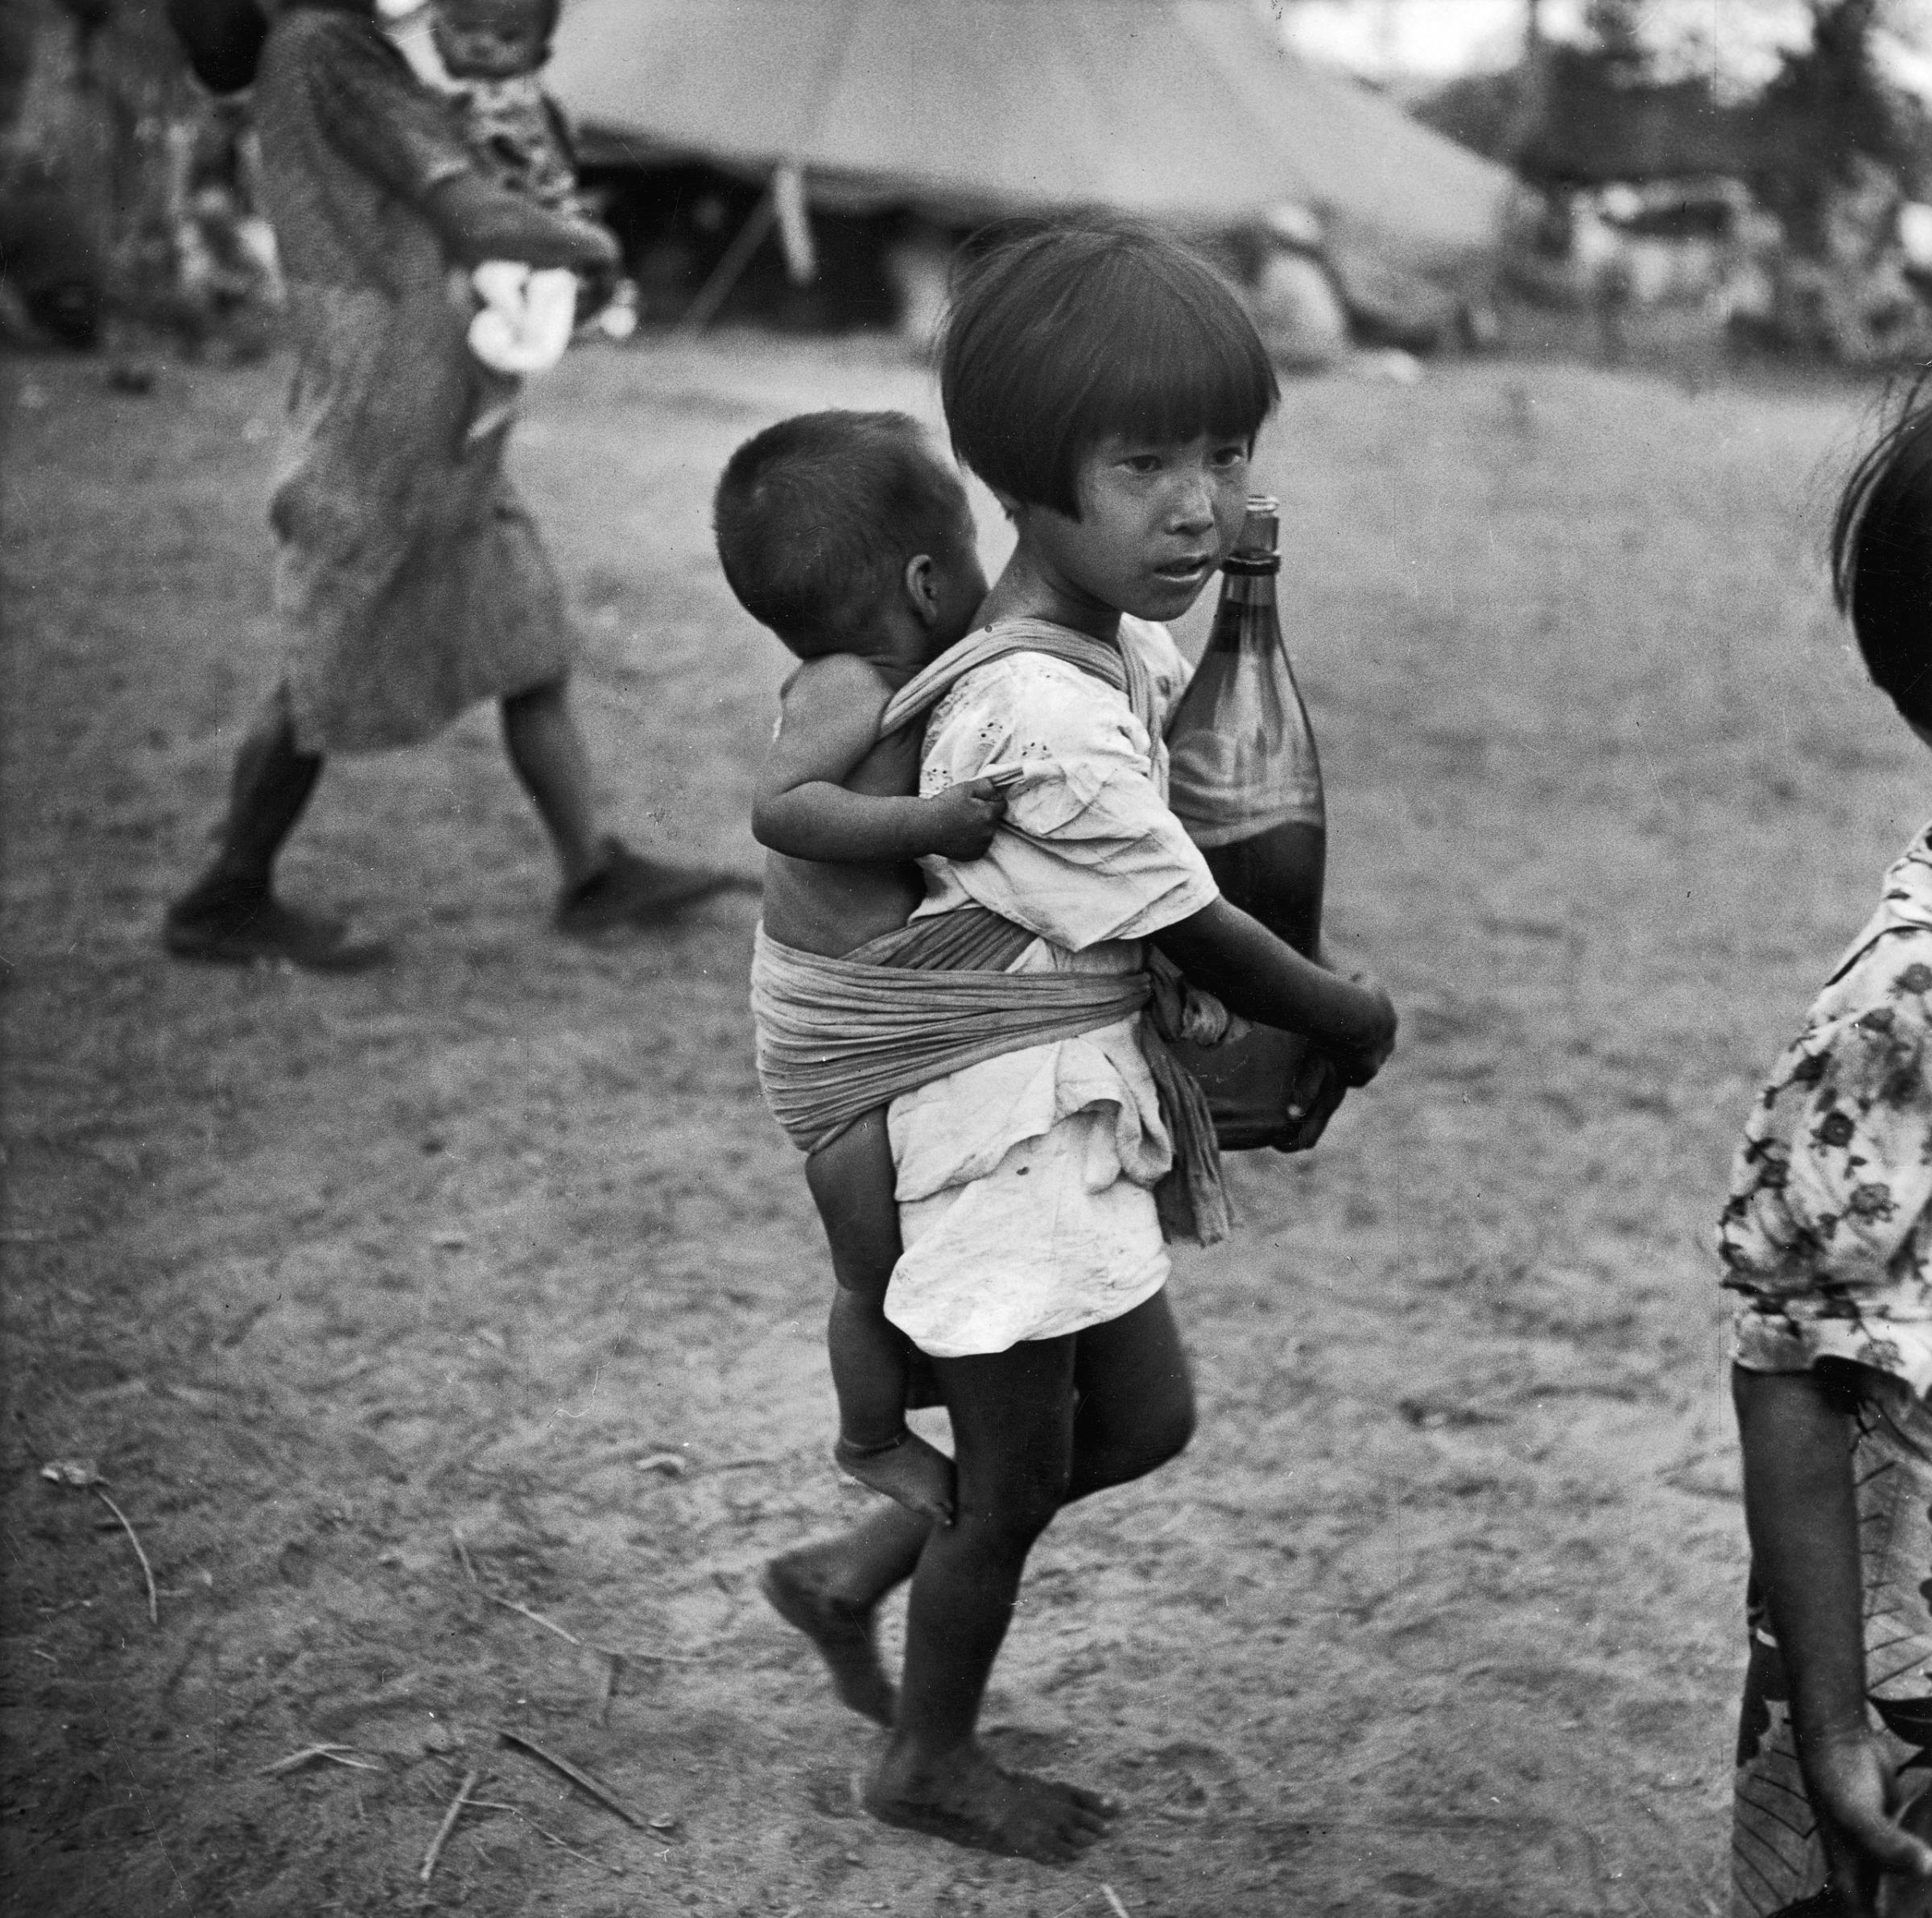 A girl in a village on Saipan (Marianas Islands) carries a bottle of water in her arms and a baby on her back in 1944.